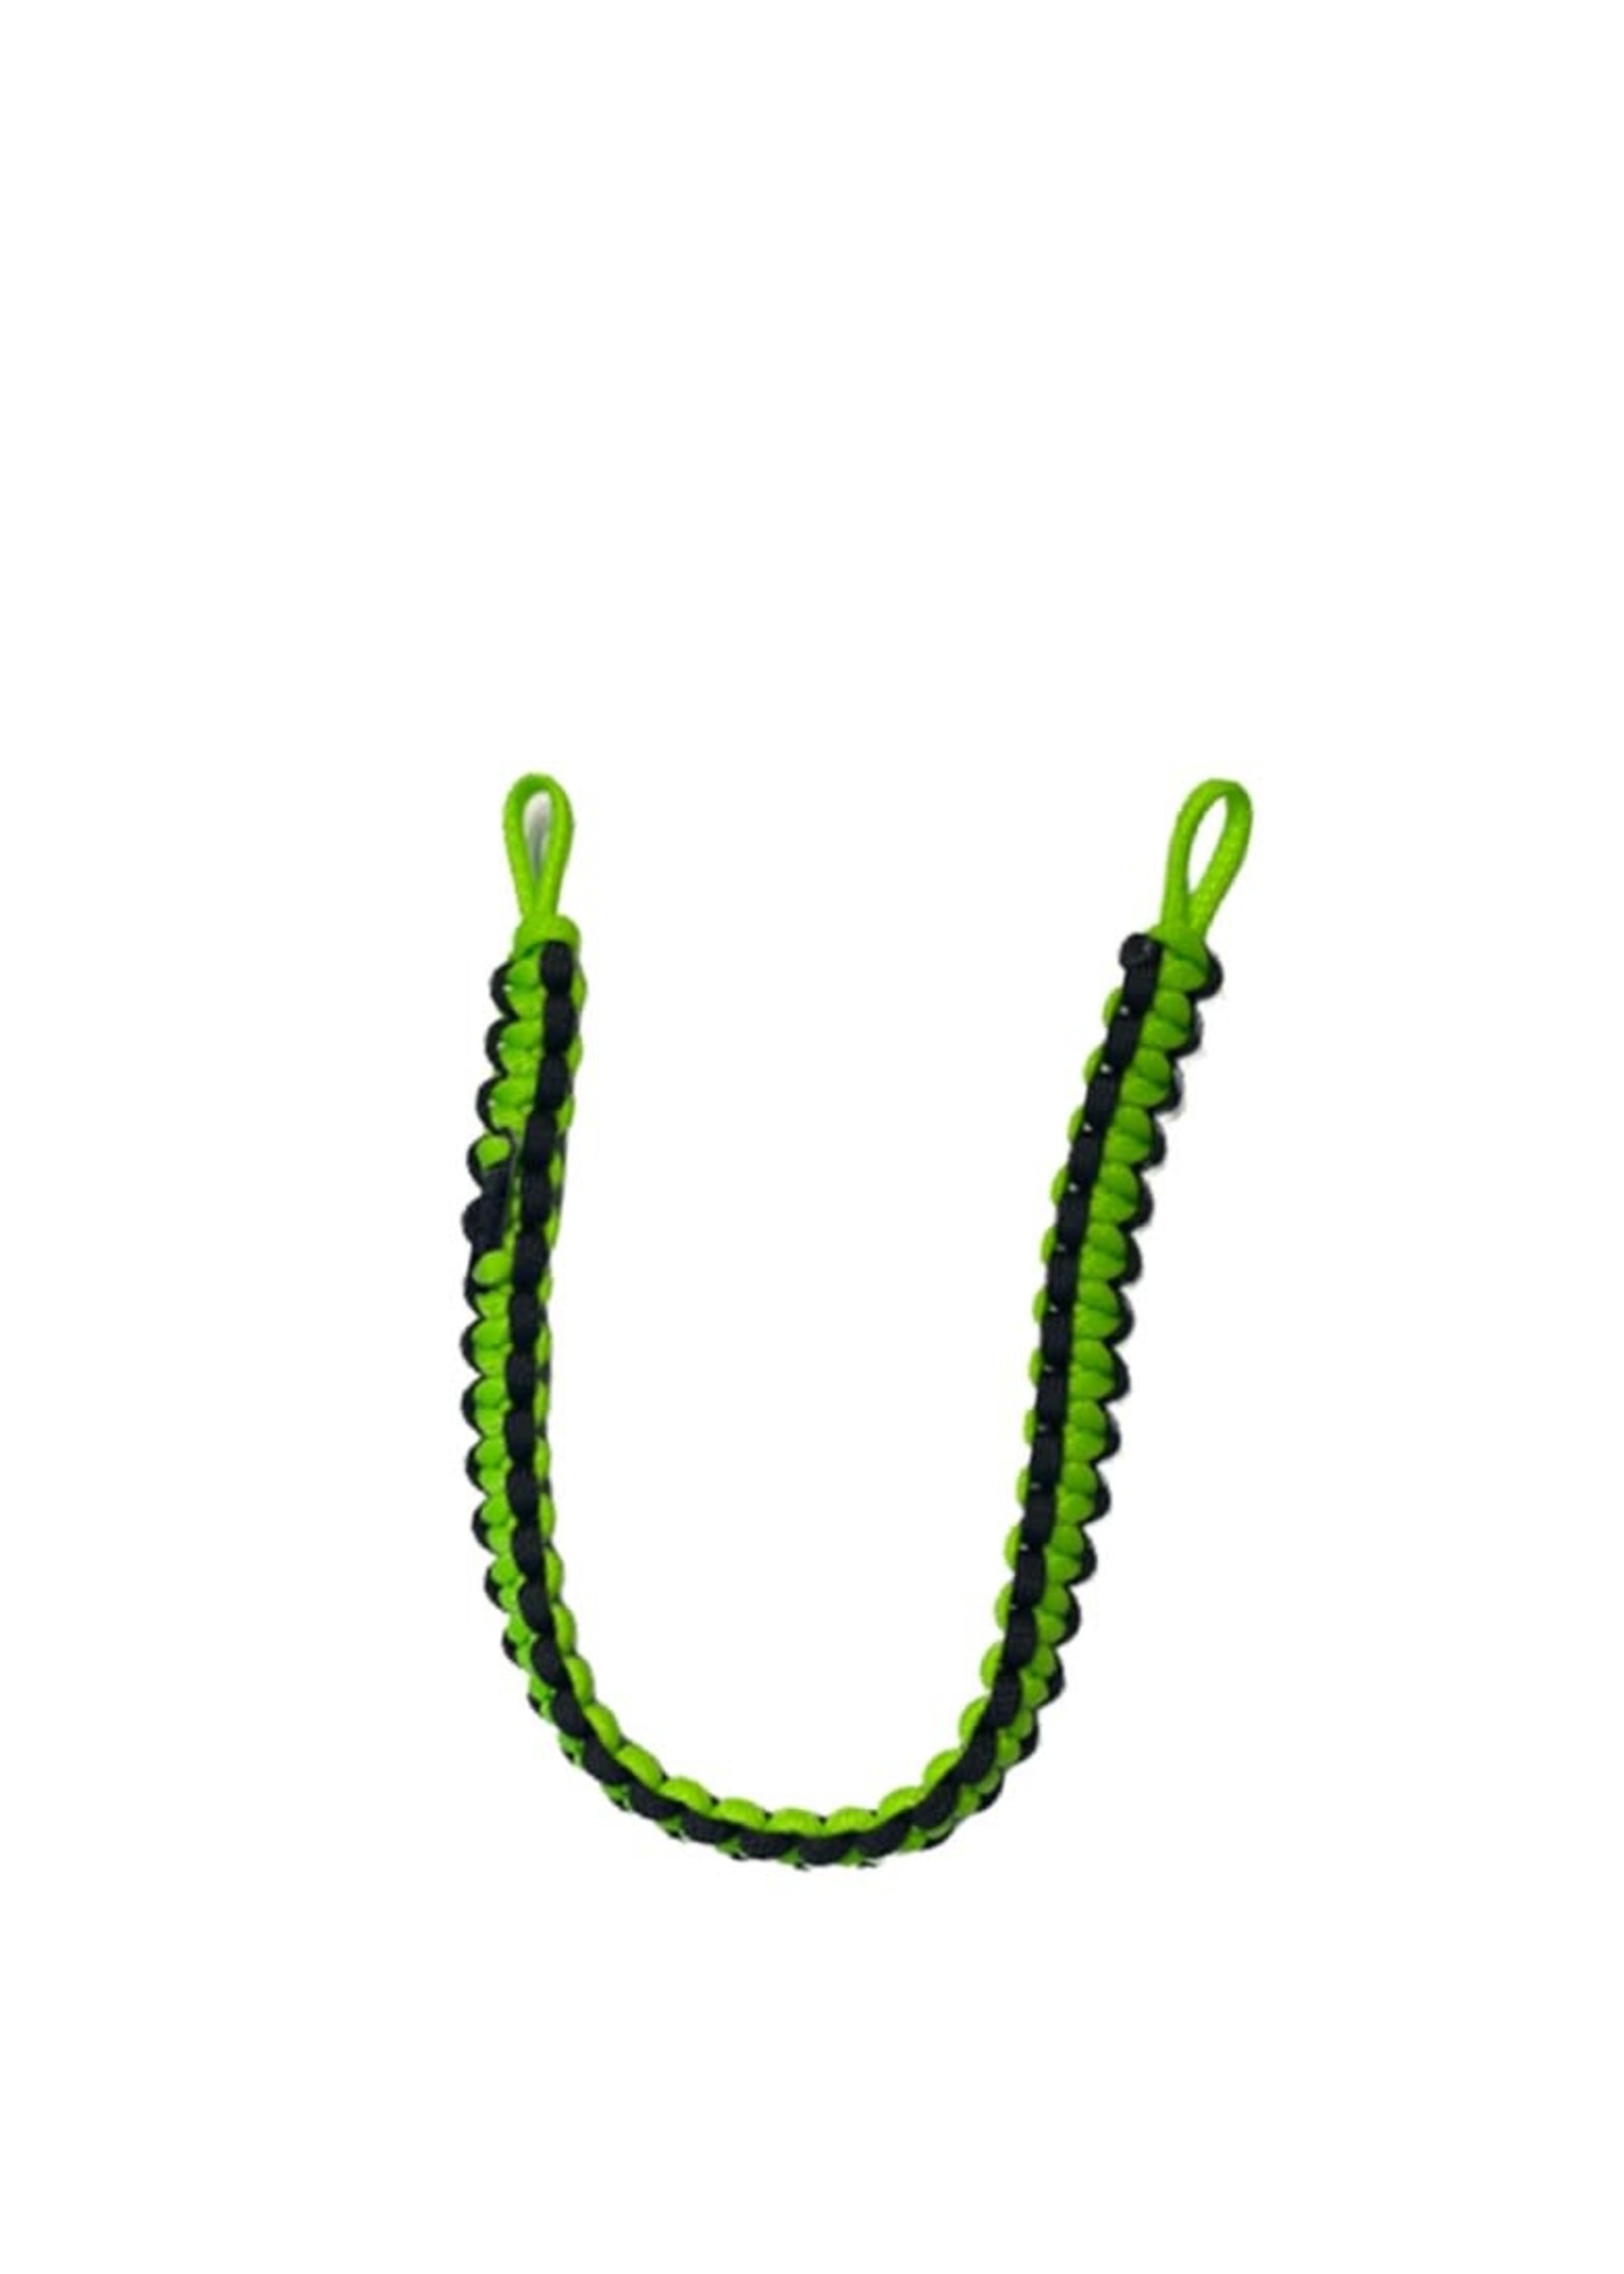 Les Produits Sam Hunting Bow Sling fluo green and black